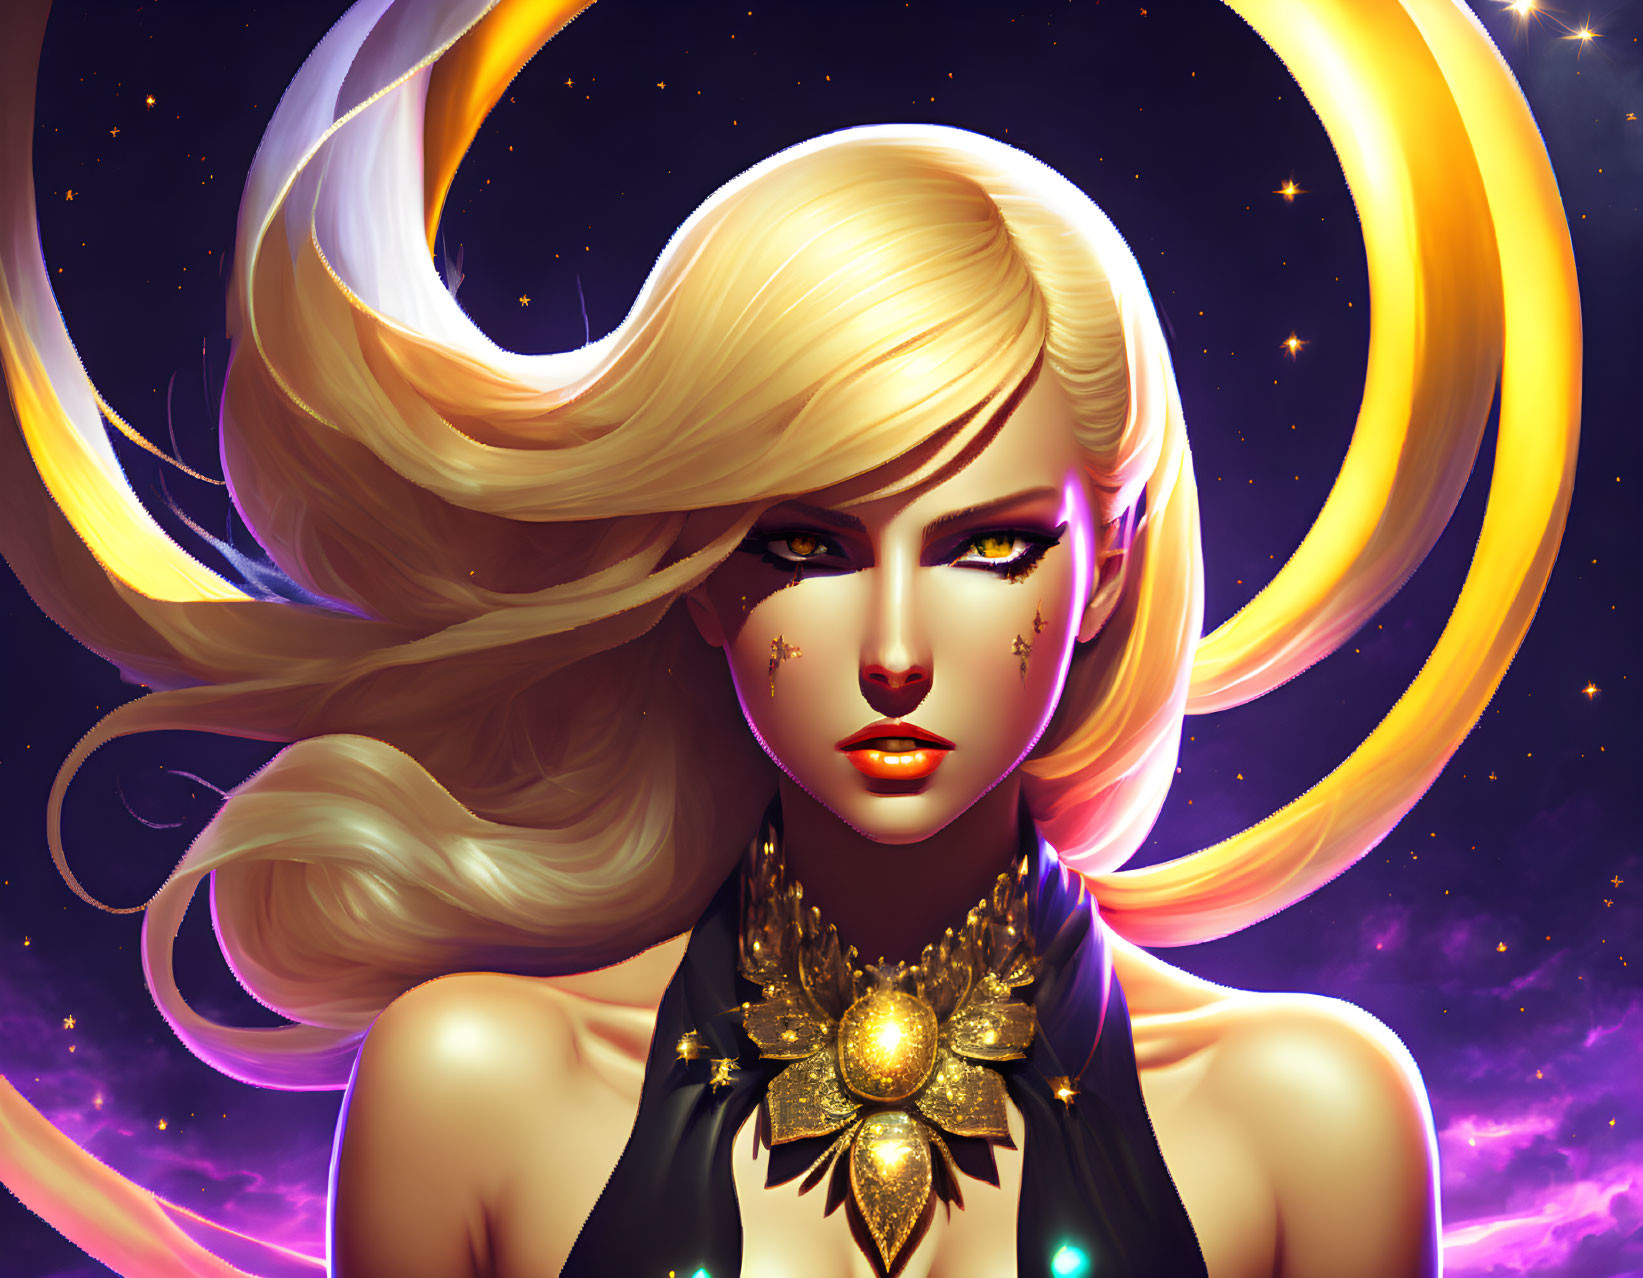 Illustration of woman with golden hair and star-studded makeup in cosmic setting